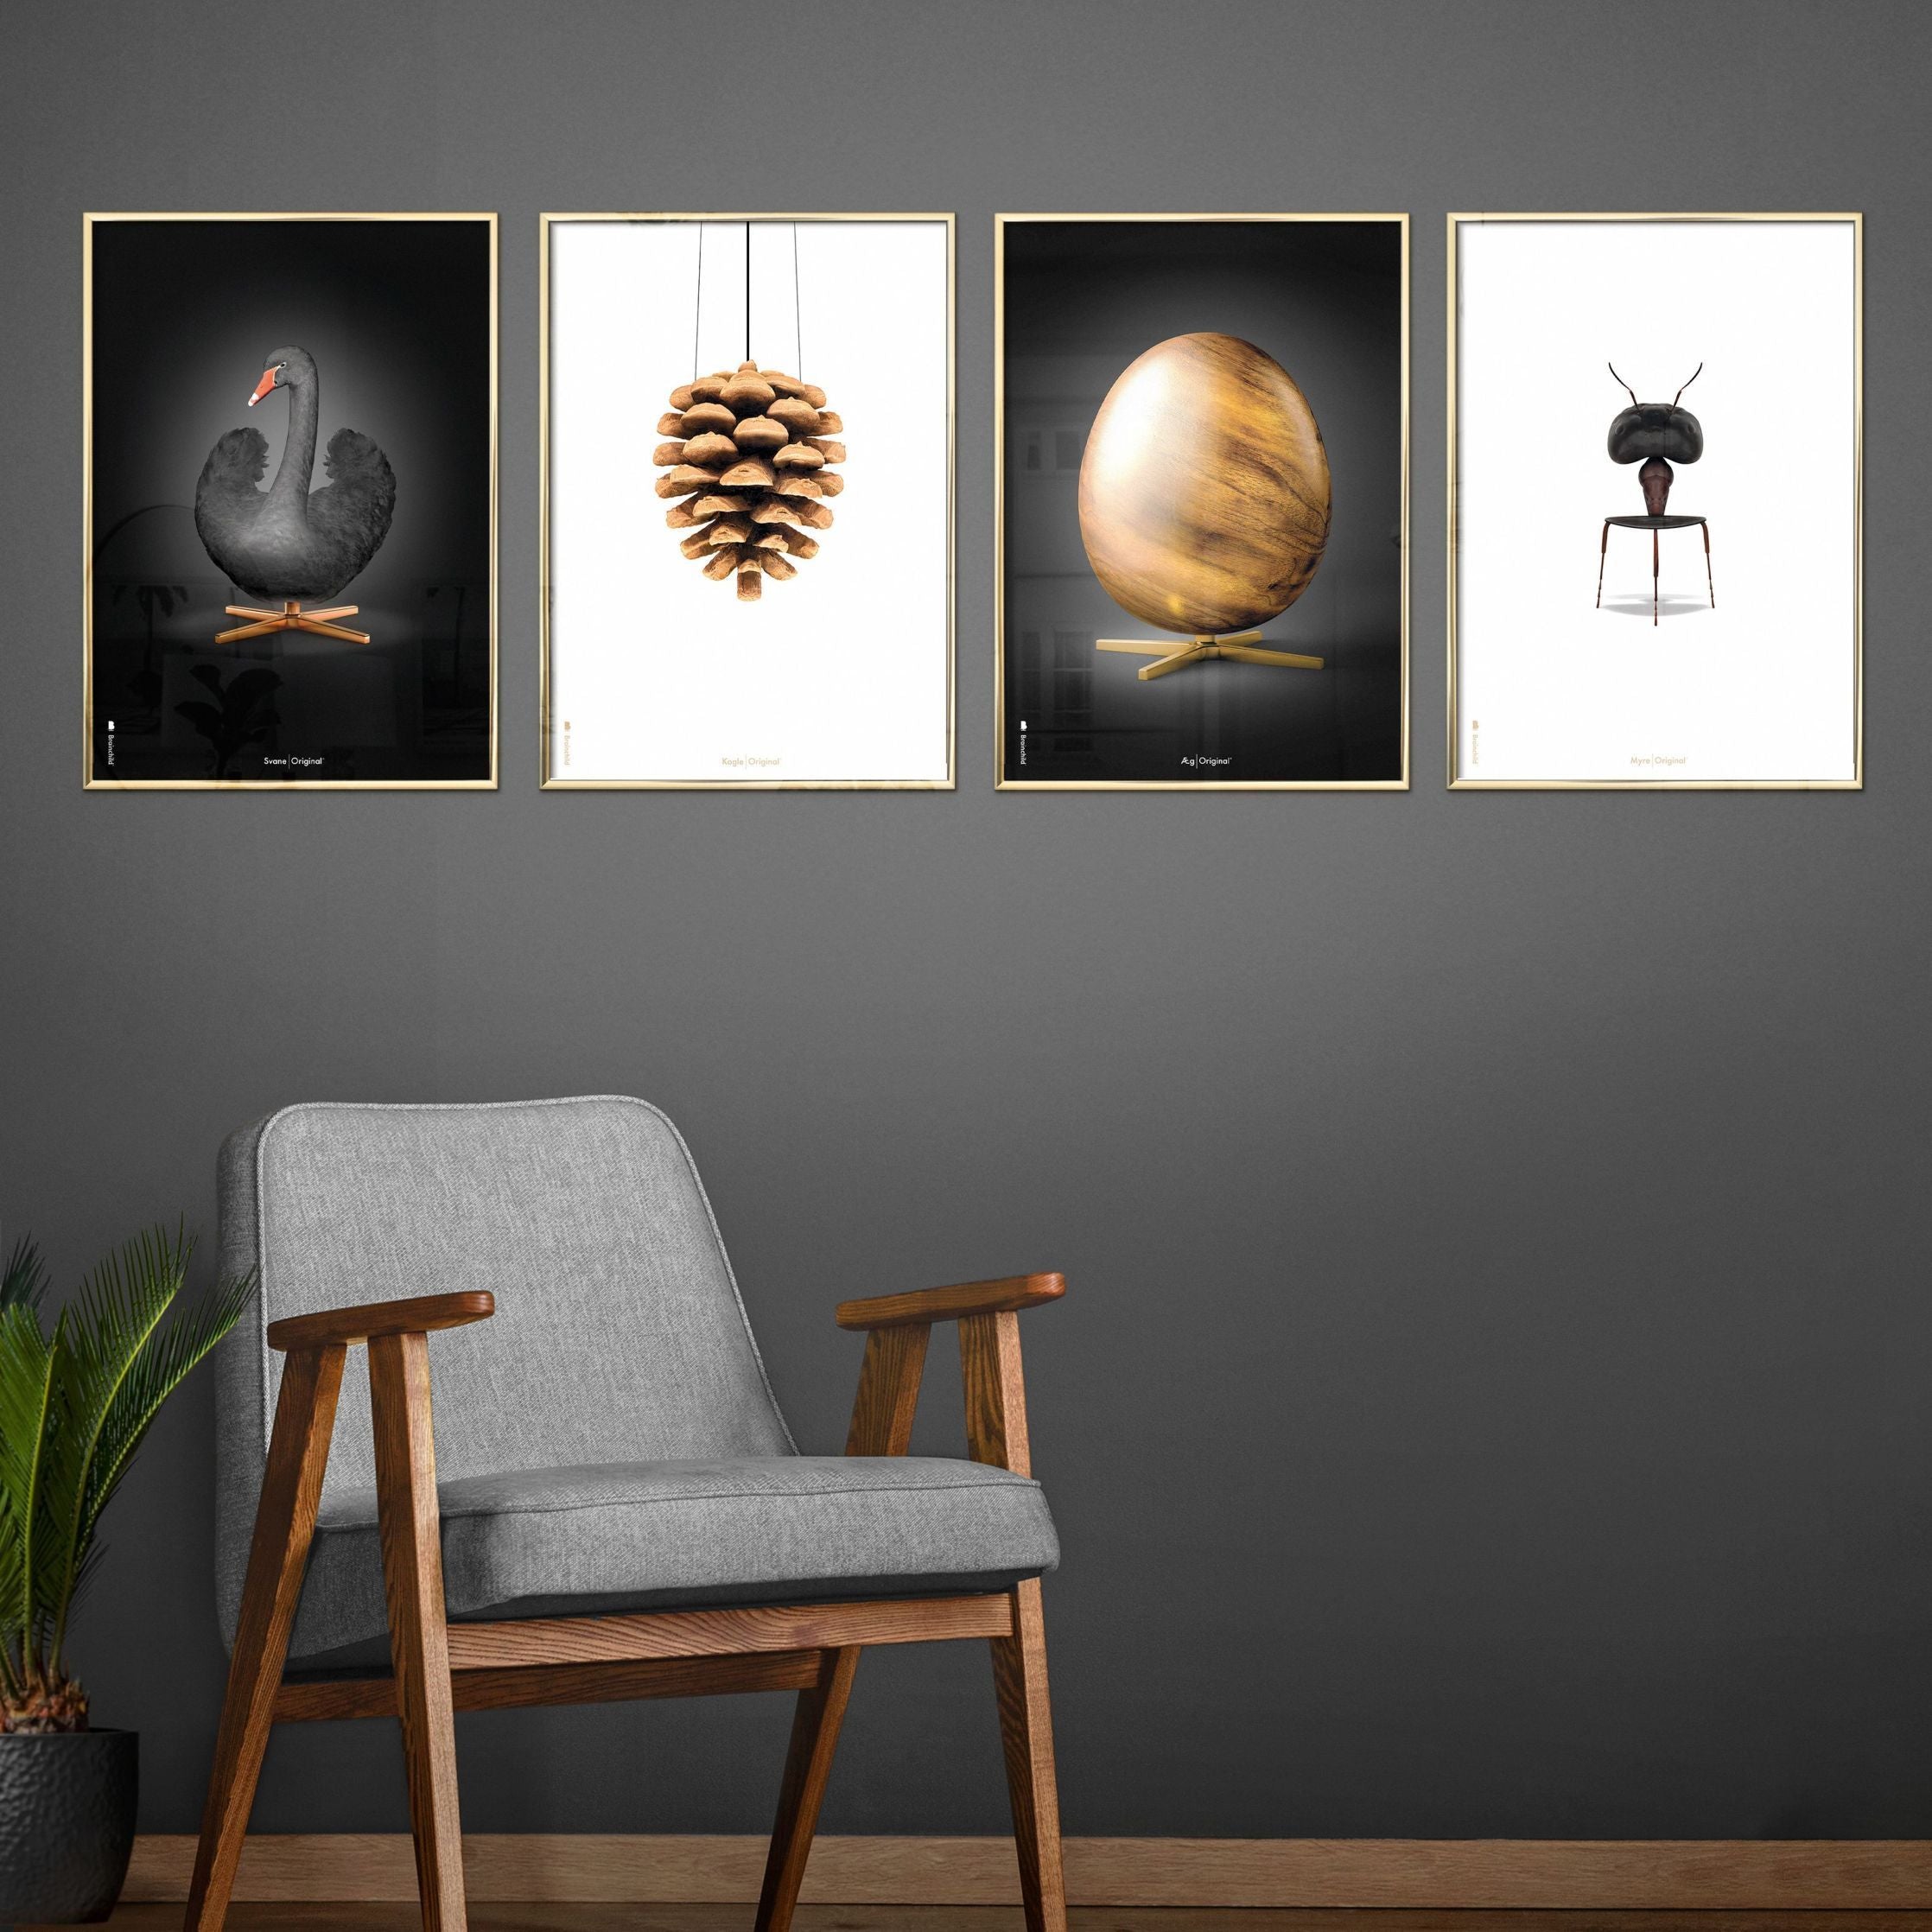 Brainchild Ant Classic Poster, Frame In Black Lacquered Wood 50x70 Cm, White Background